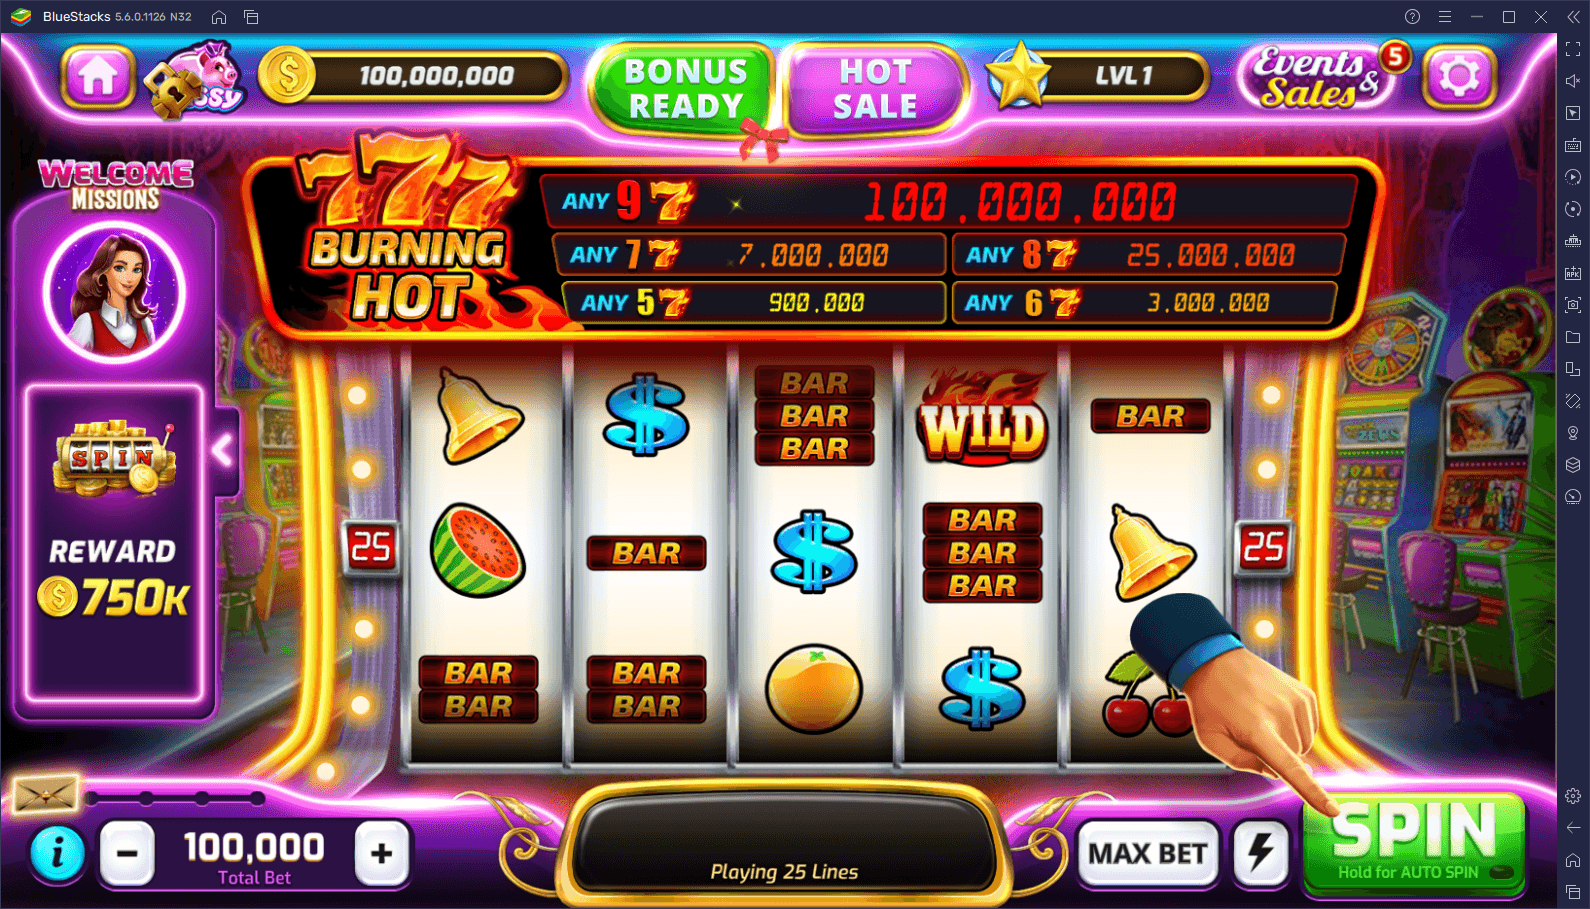 How to Play Baba Wild Slots - Vegas Casino on PC with BlueStacks